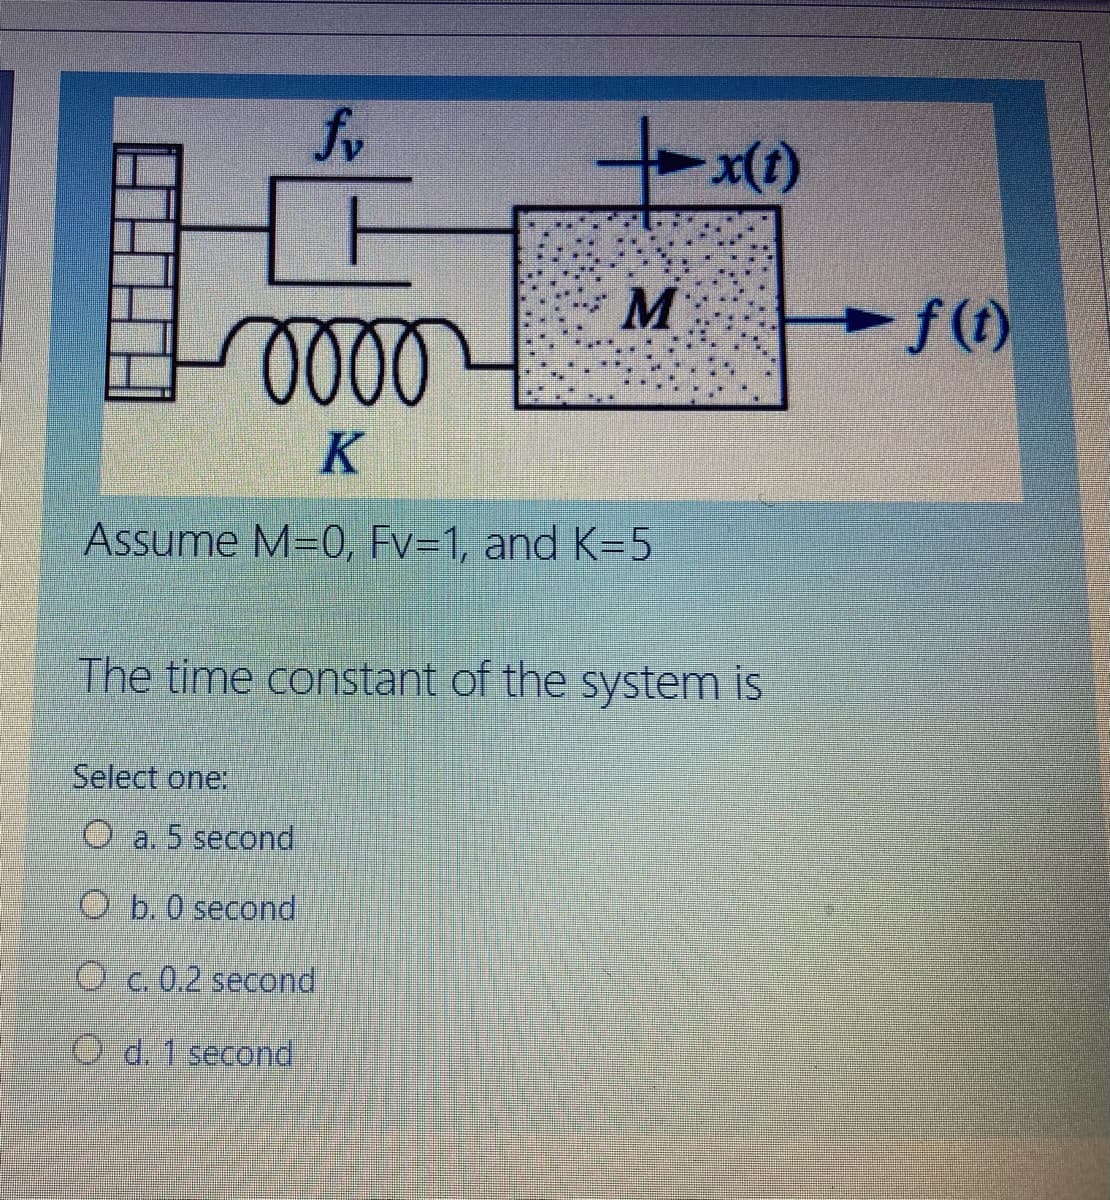 000
K
Assume M=0, Fv=1, and K=5
The time constant of the system is
Select one:
O a. 5 second
O b.0 second
O c. 0.2 second
O d. 1 second
